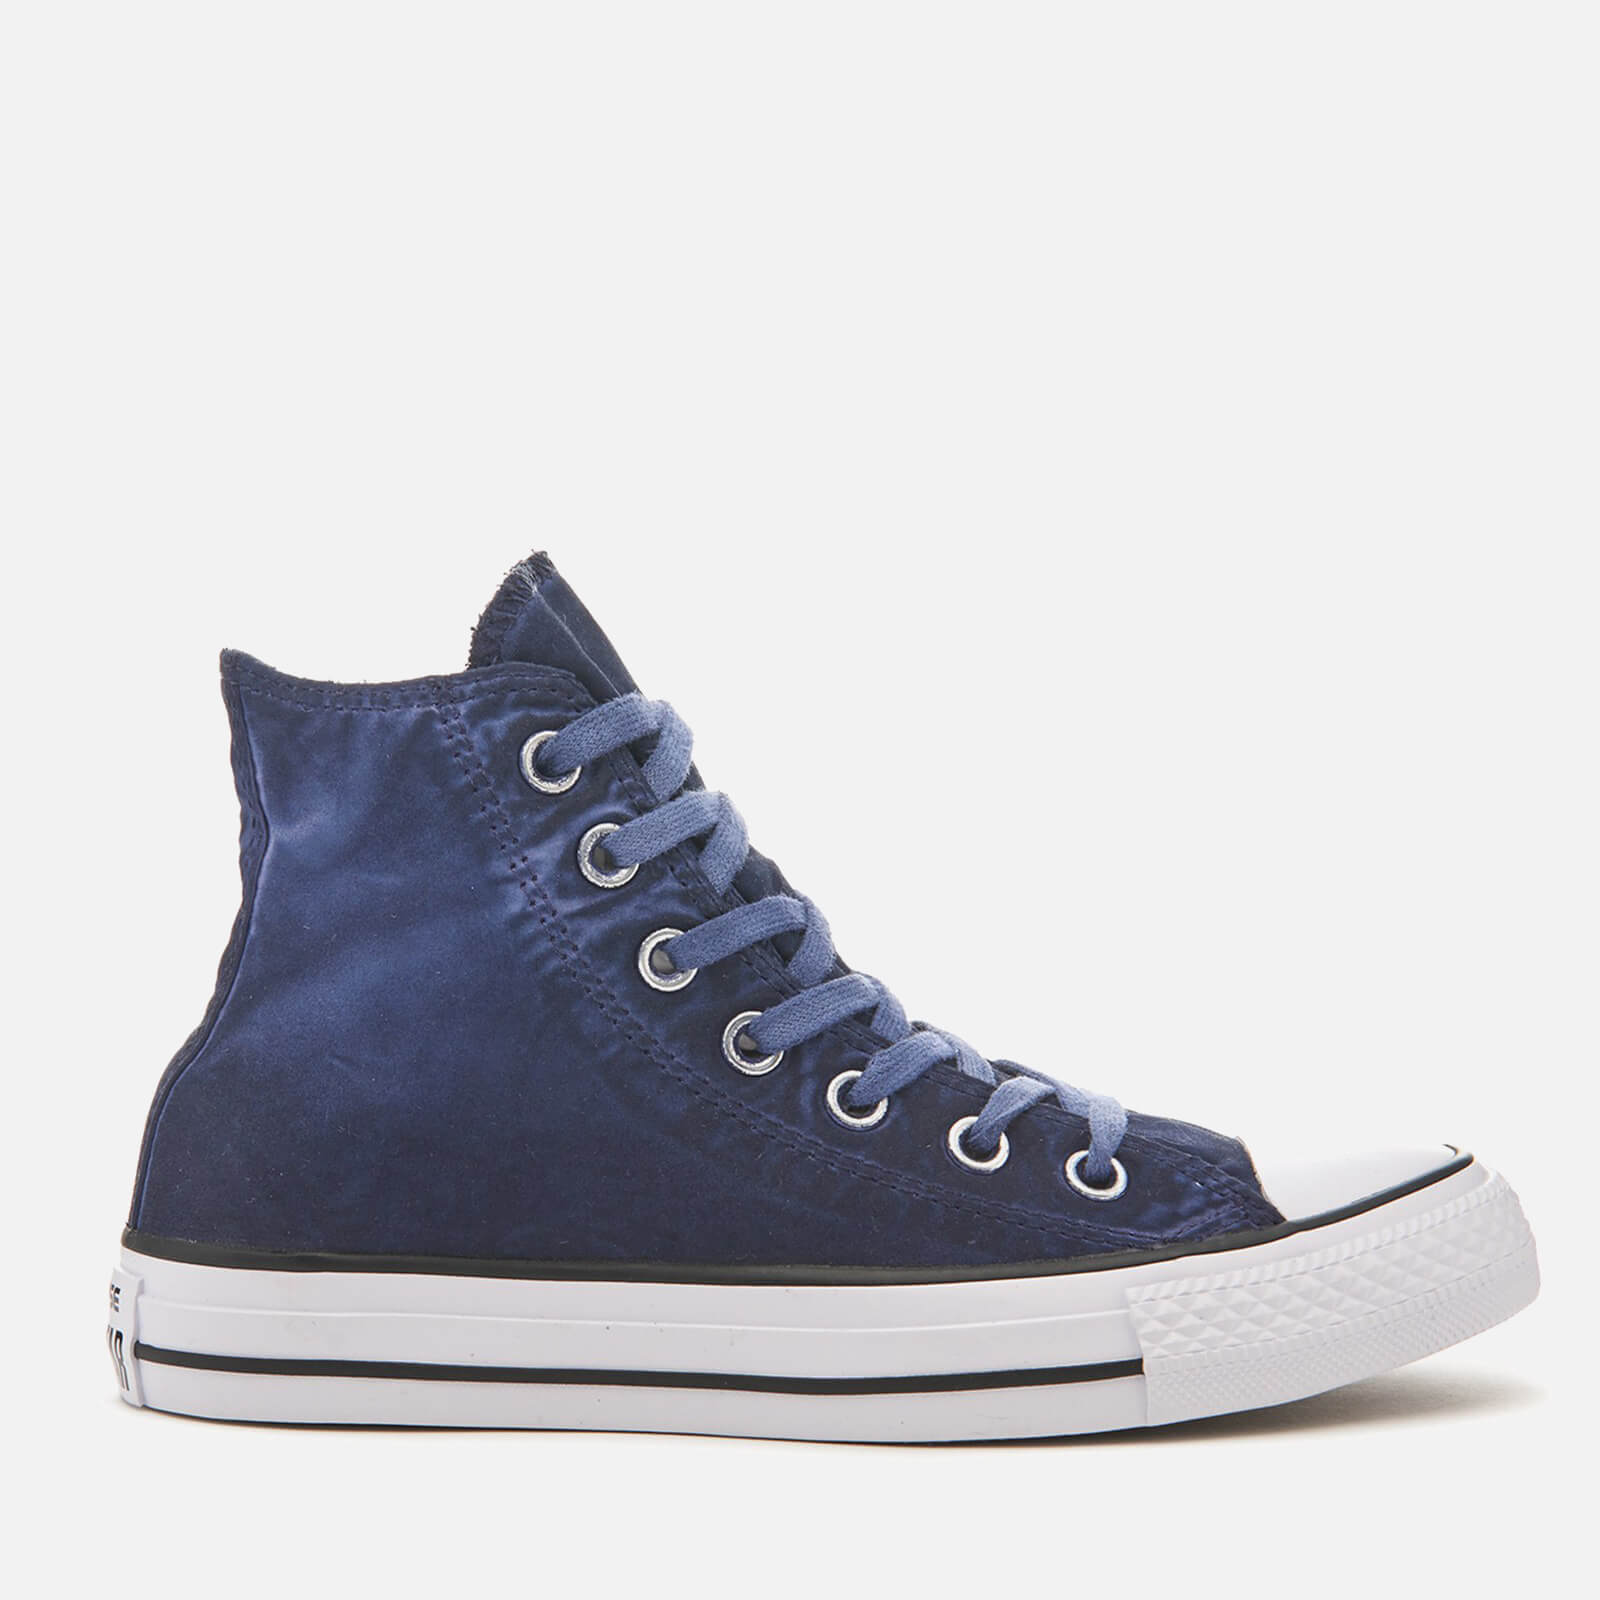 Allsole: 30% Off Converse Chuck Taylor All Star Hi-Top Trainers